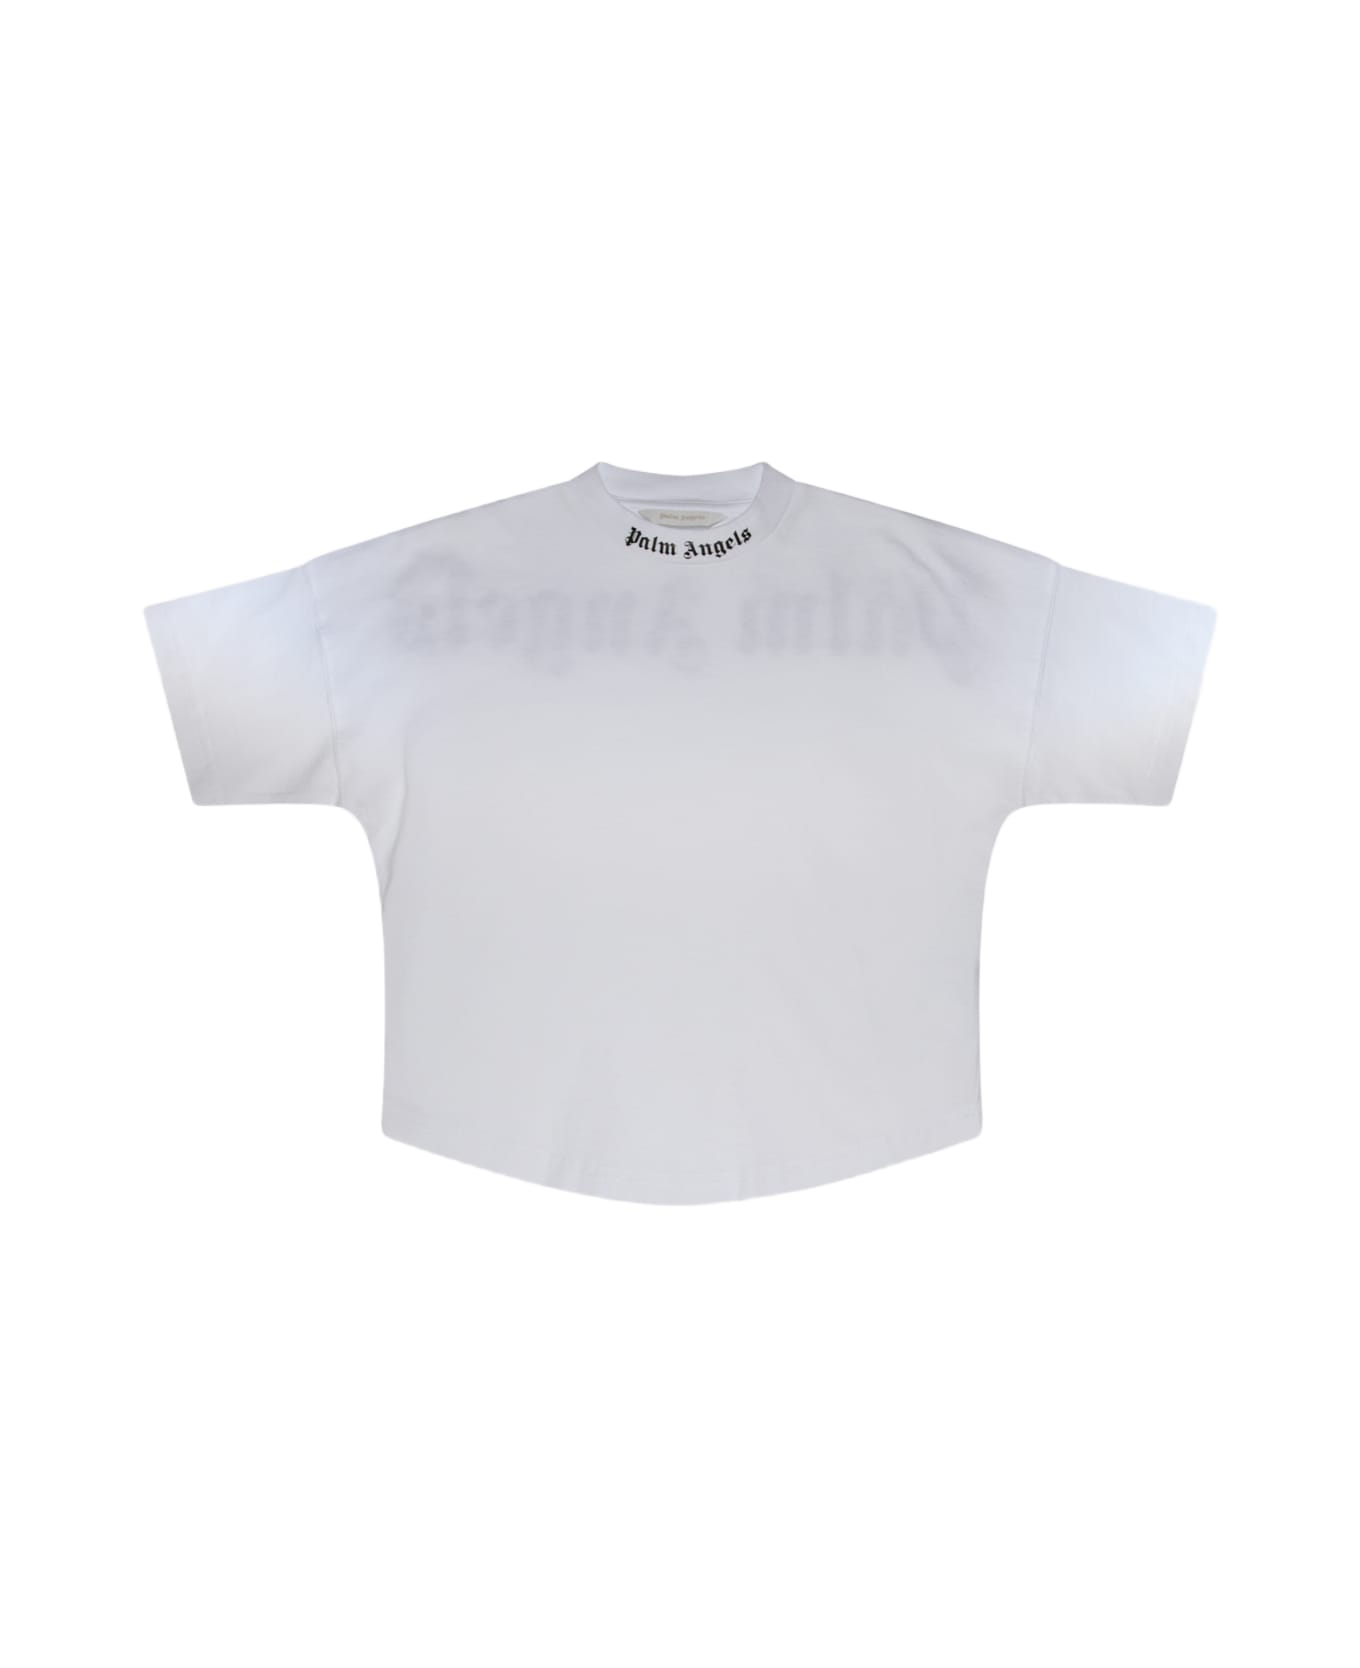 Palm Angels Whtie And Black Cotton Logo Cropped T-shirt - White